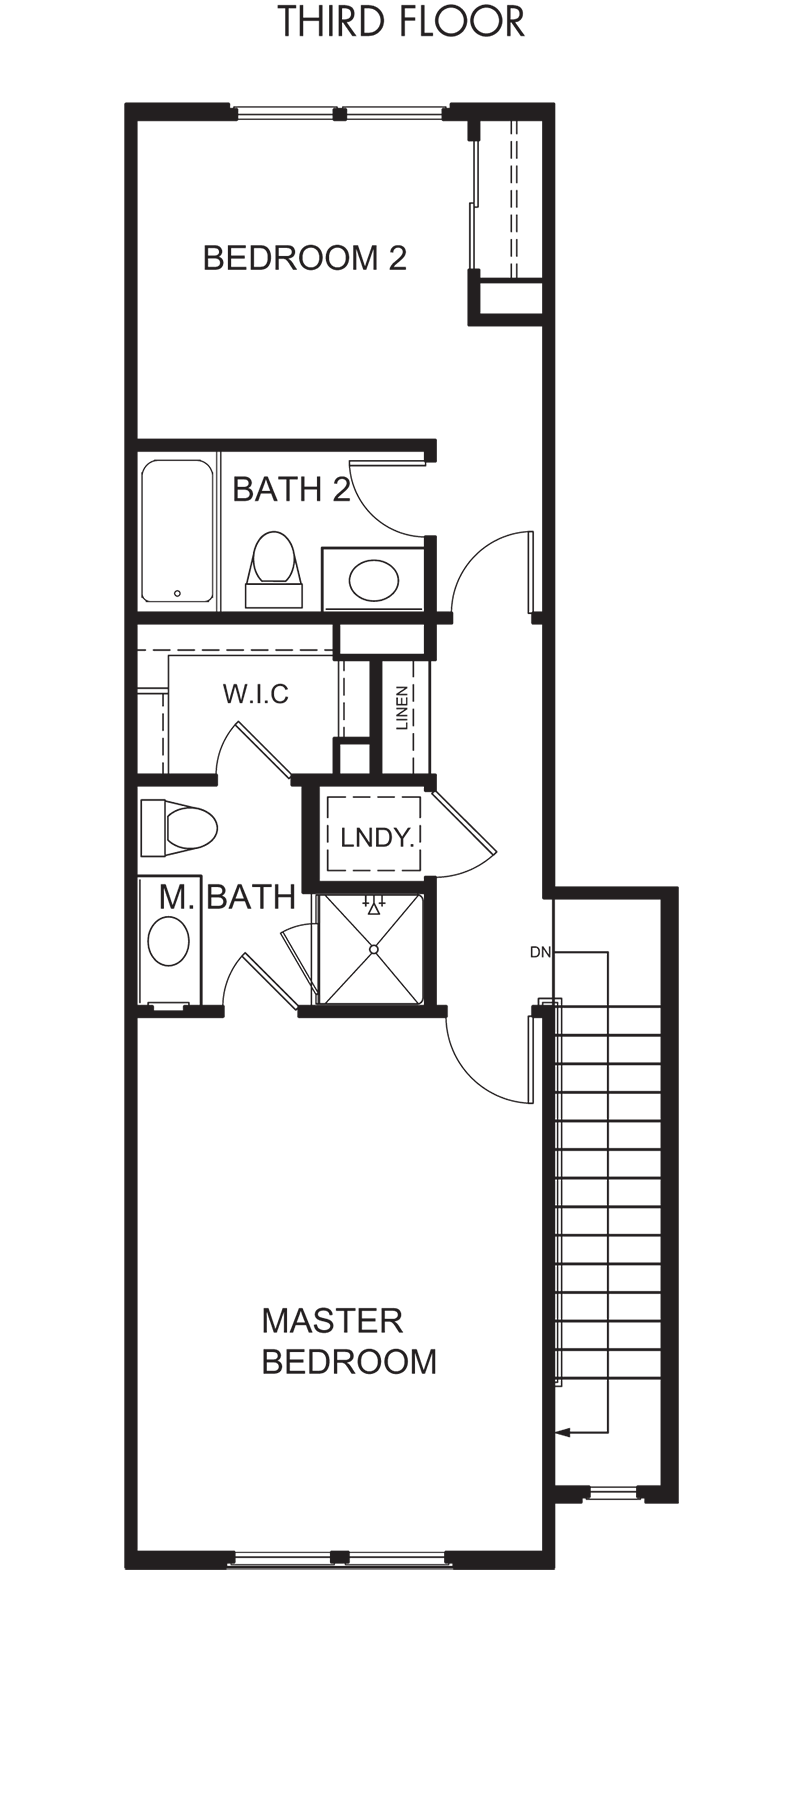 Floor Plan Drawing Free download on ClipArtMag